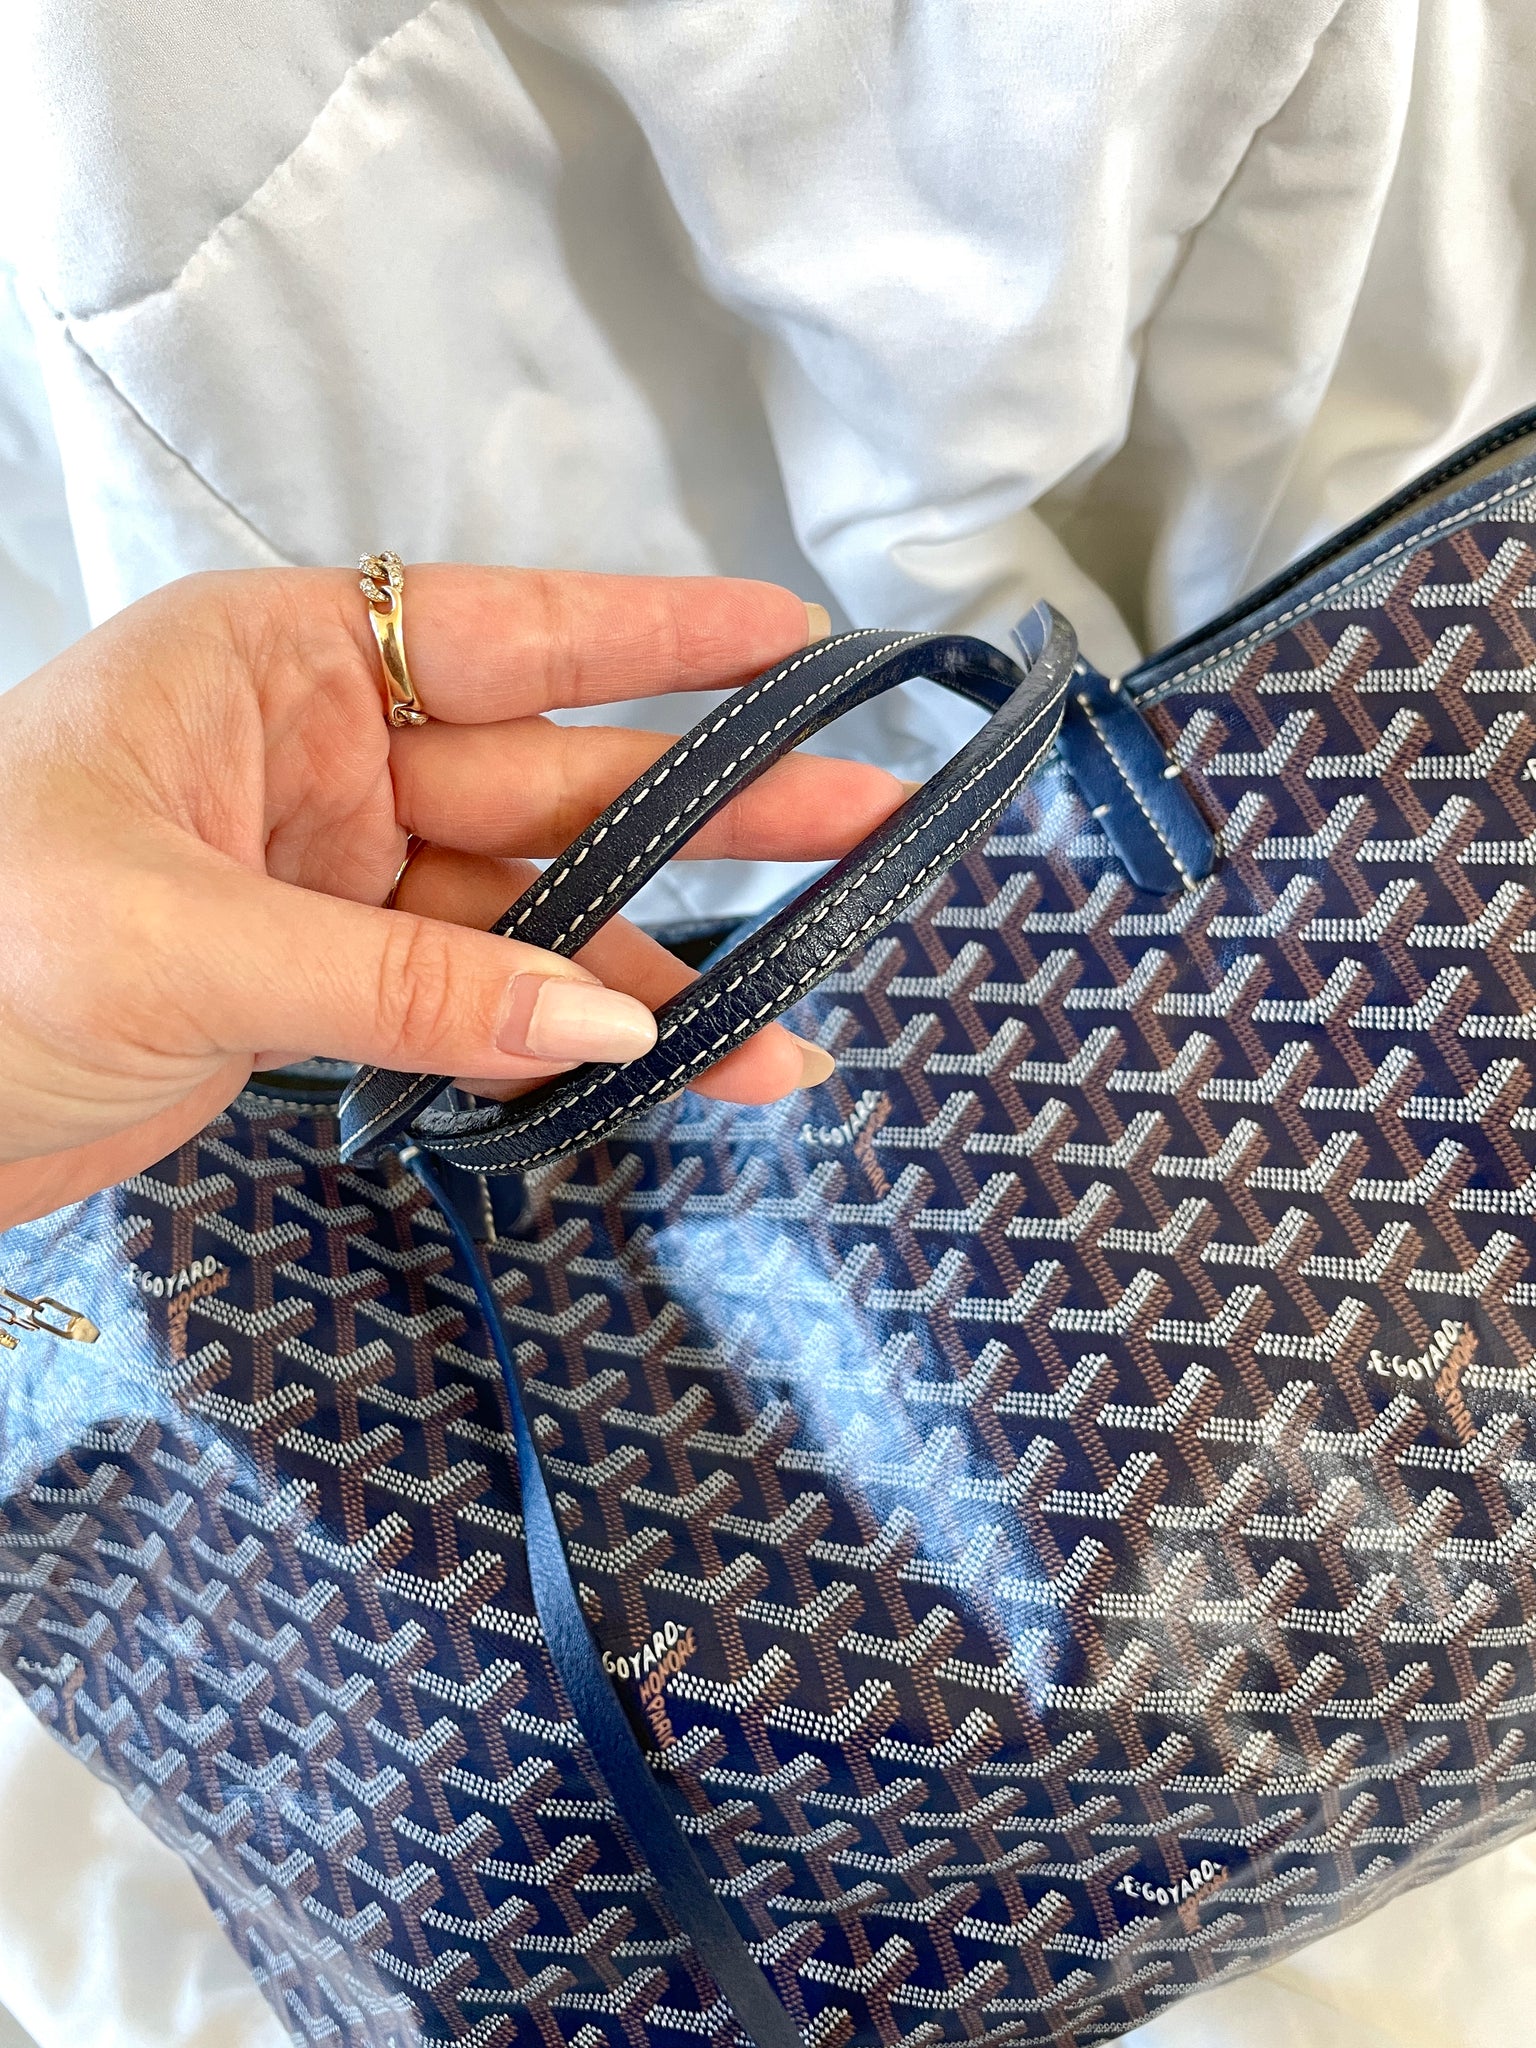 Goyard St. Louis GM Tote with Pouch